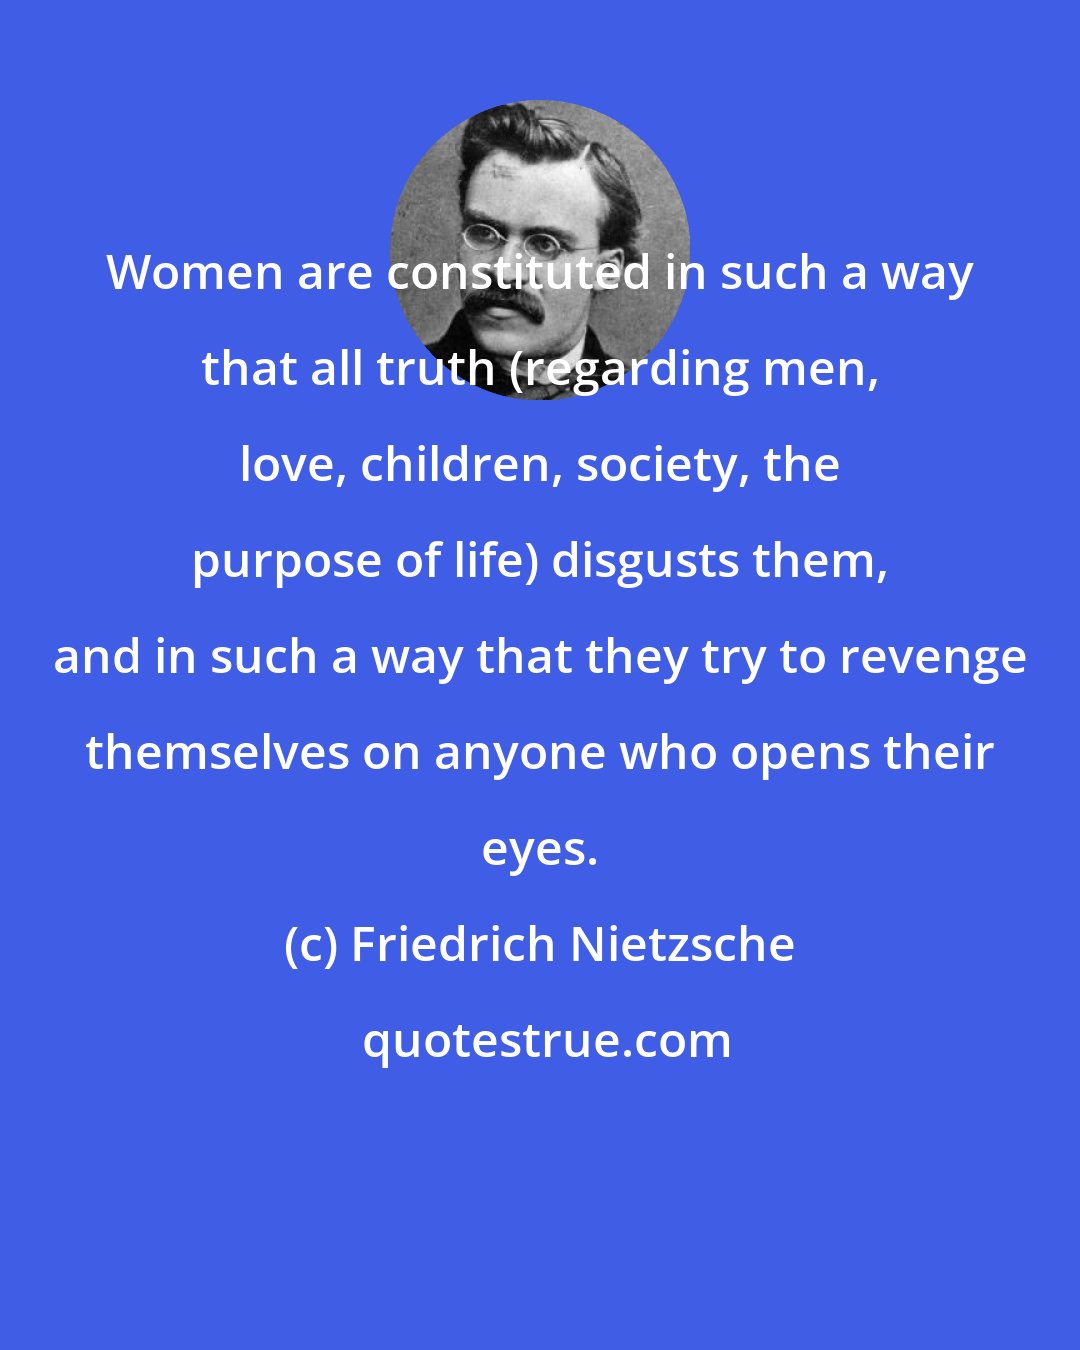 Friedrich Nietzsche: Women are constituted in such a way that all truth (regarding men, love, children, society, the purpose of life) disgusts them, and in such a way that they try to revenge themselves on anyone who opens their eyes.